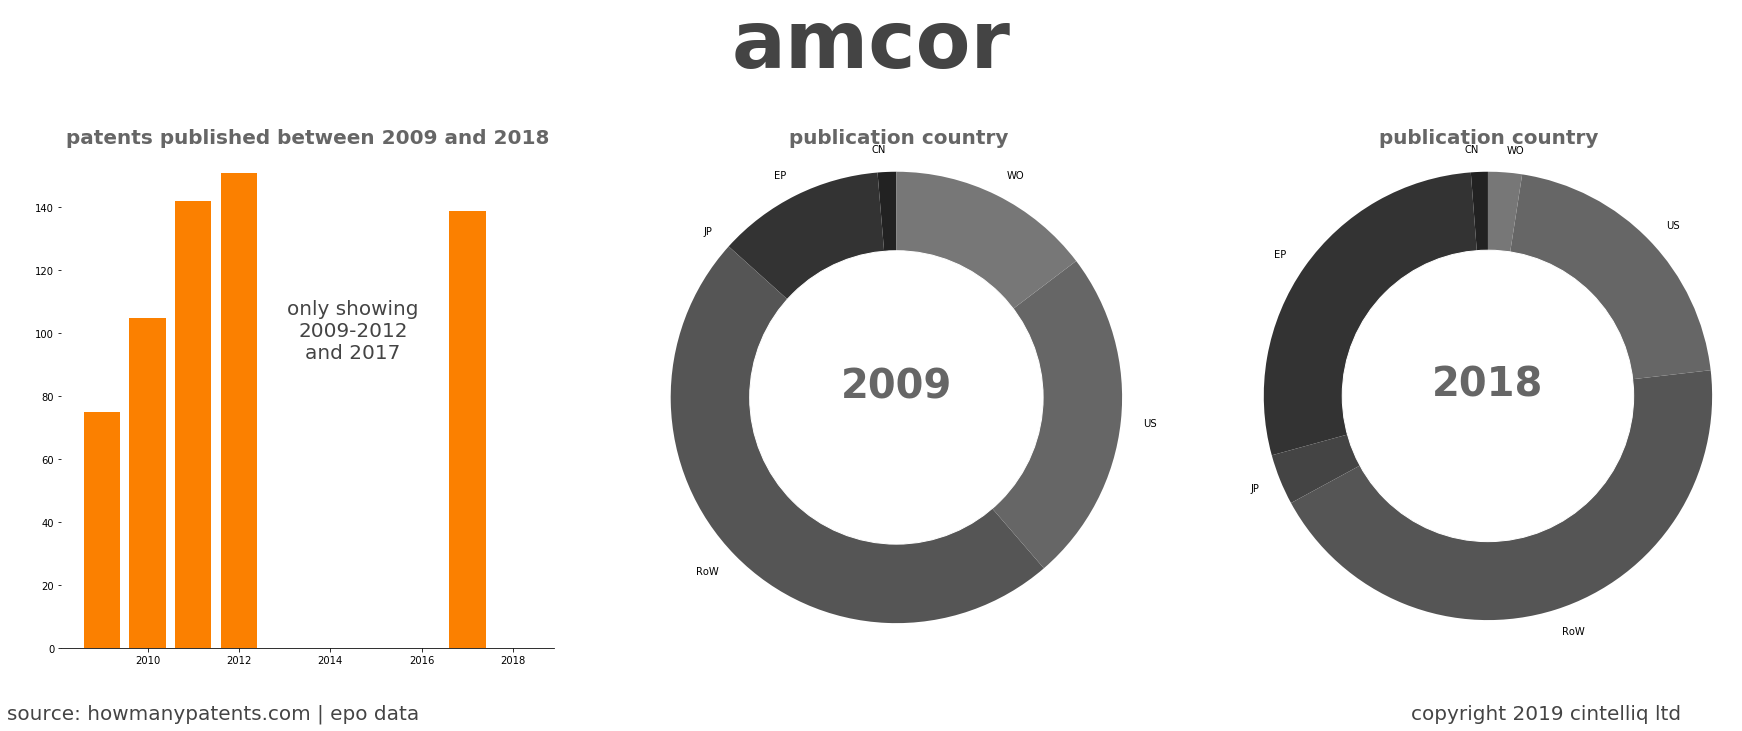 summary of patents for Amcor